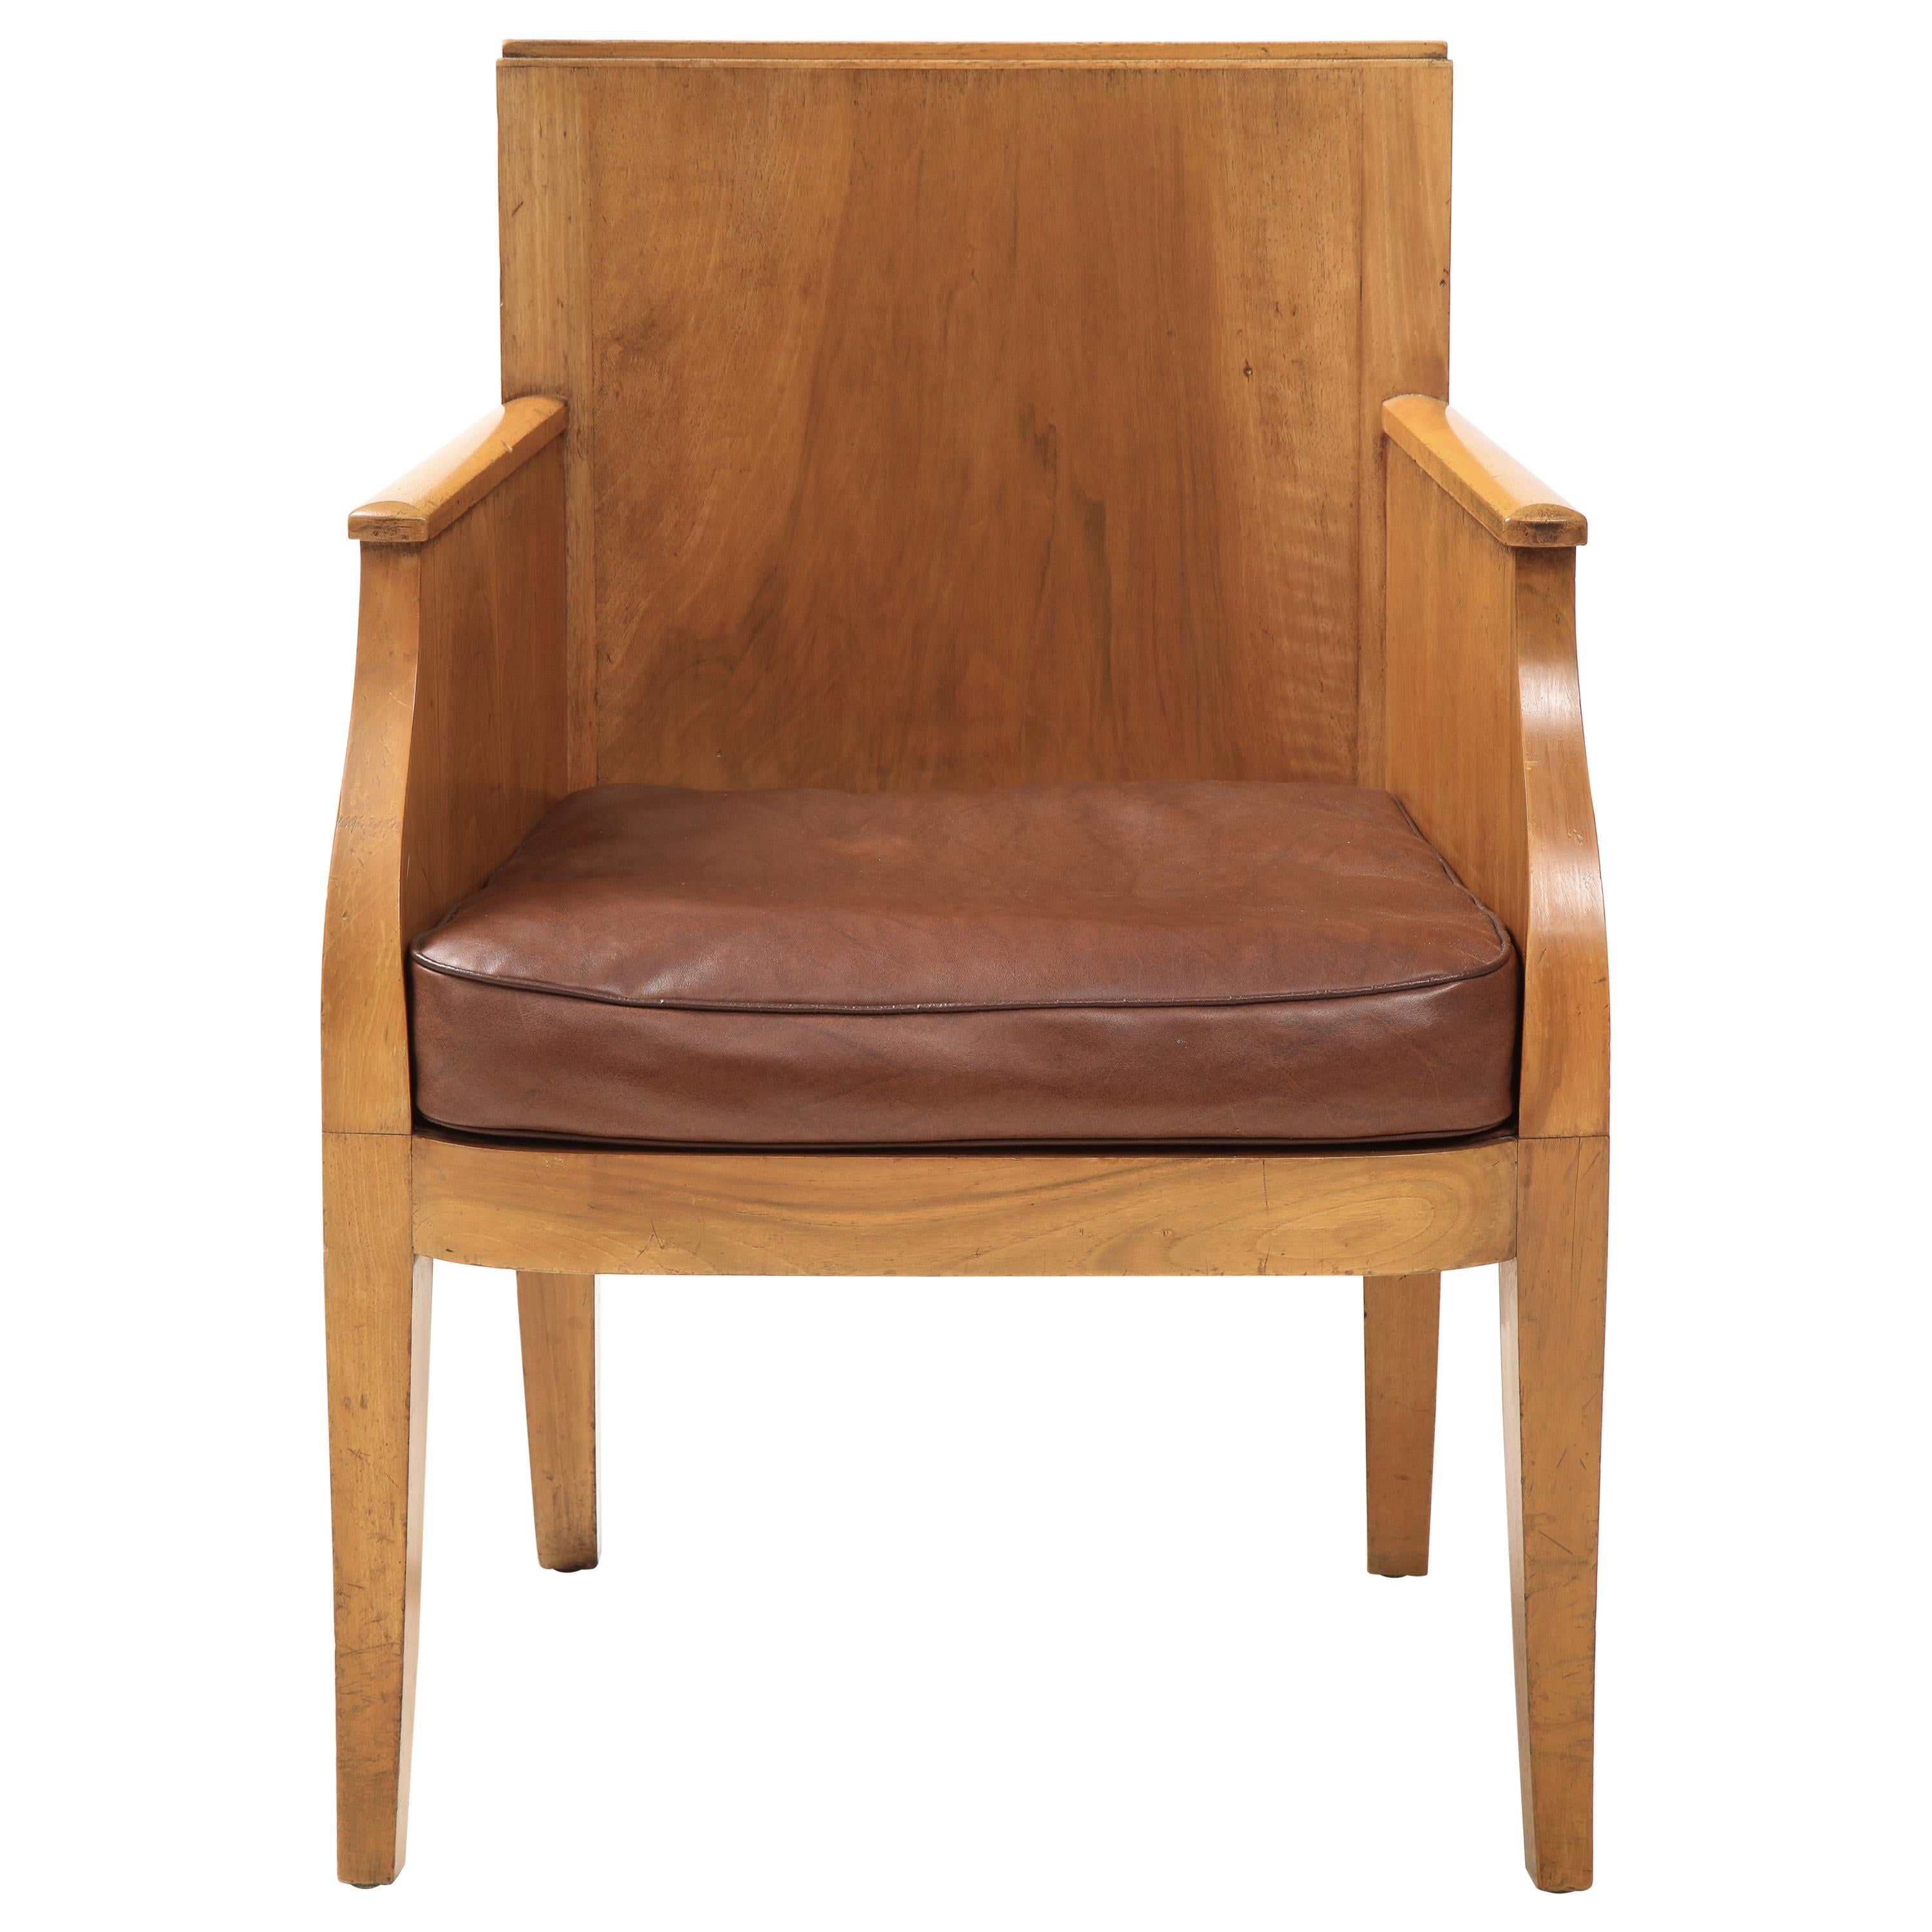 French 40’s Oak Chair with Original Brown Leather Seat, France, c. 1940